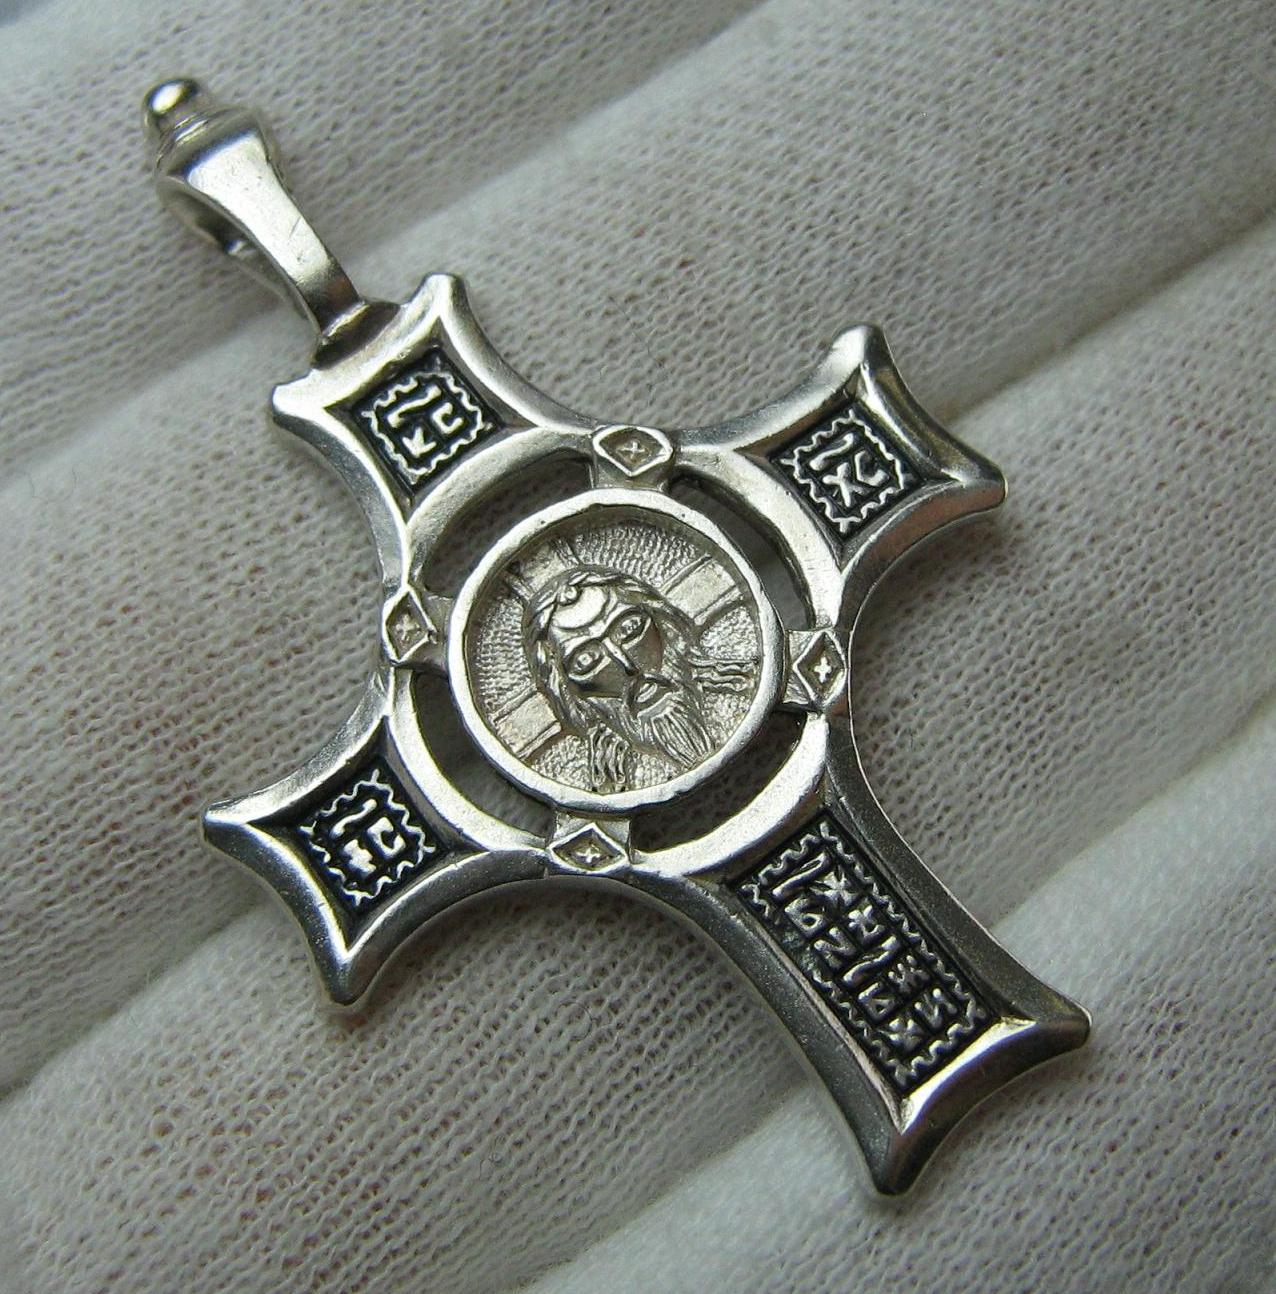 Vintage solid 925 Sterling Silver large oxidized cross pendant decorated with Vernicle image of the Saviour, also called Jesus Christ Face of Edessa or Head not made by human hands and Christian prayer inscriptions